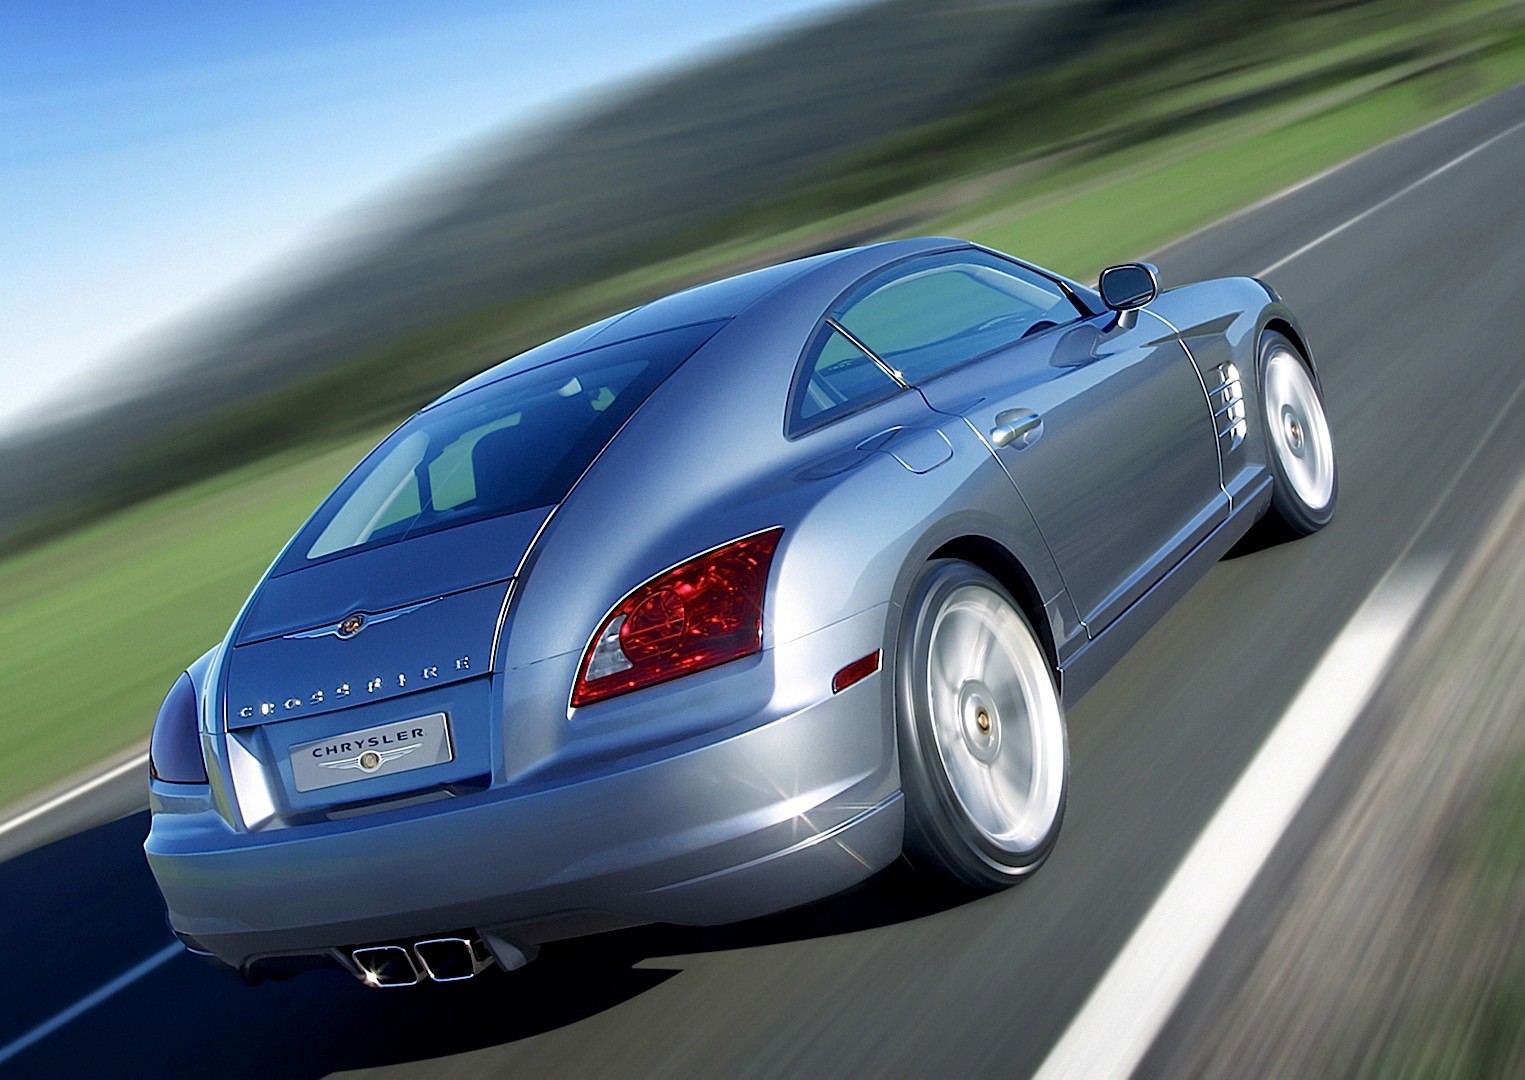 Interesting Collector Cars For Less Than $50k USD - Chrysler Crossfire